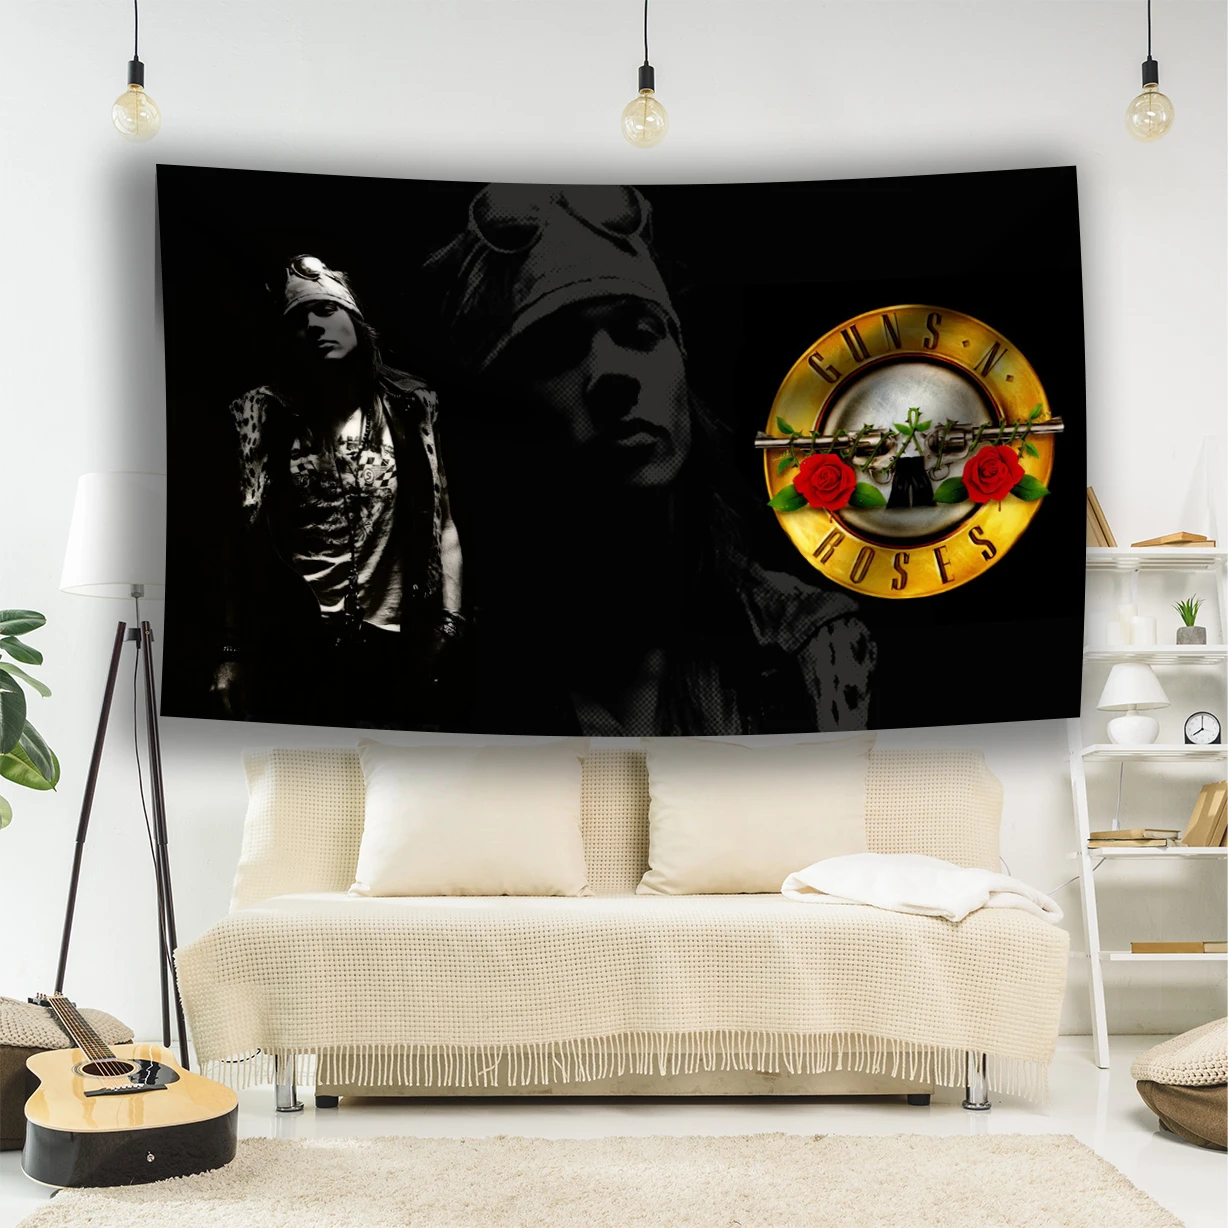 

Guns, Roses Rock Band Tapestries Banners Music Art Printed Posters Clubs Student Dormitories Bedside Hangings